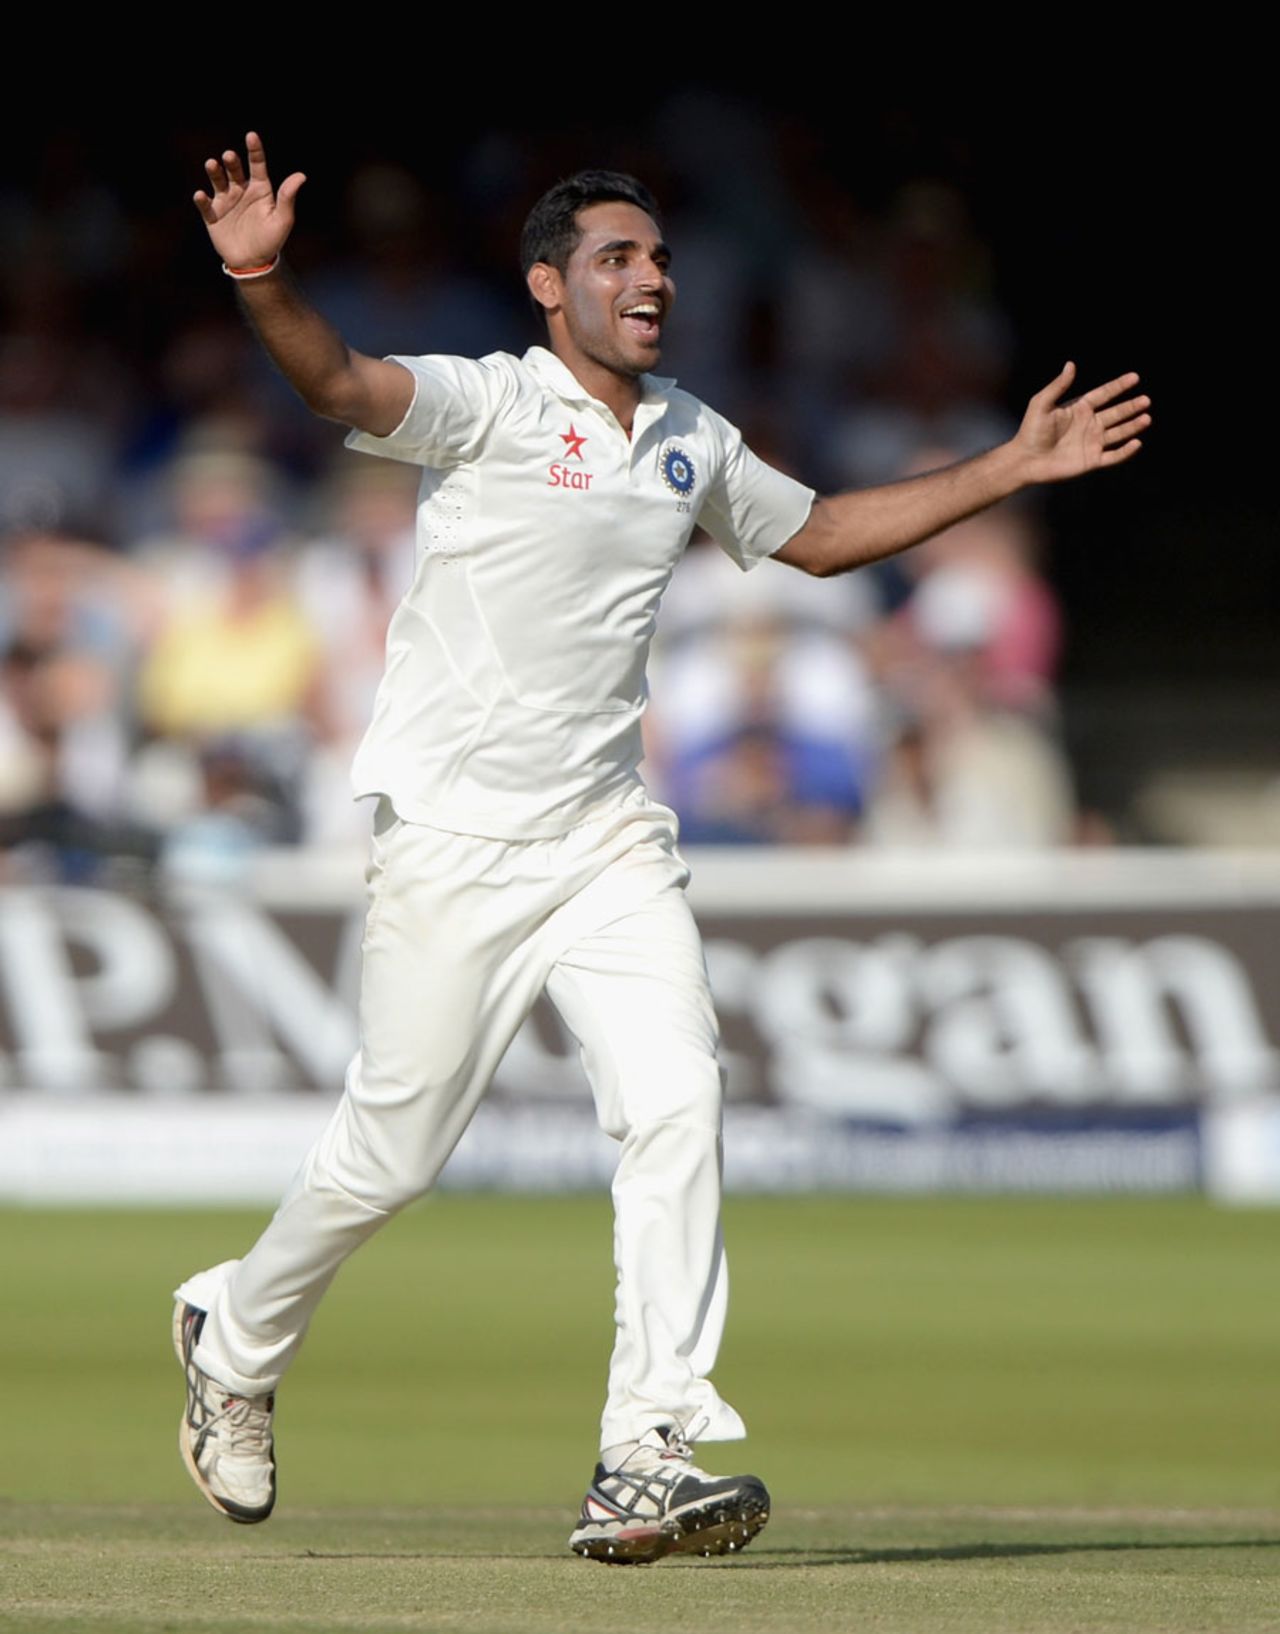 Bhuvneshwar Kumar took four wickets on day two, England v India, 2nd Investec Test, Lord's, 2nd day, July 18, 2014